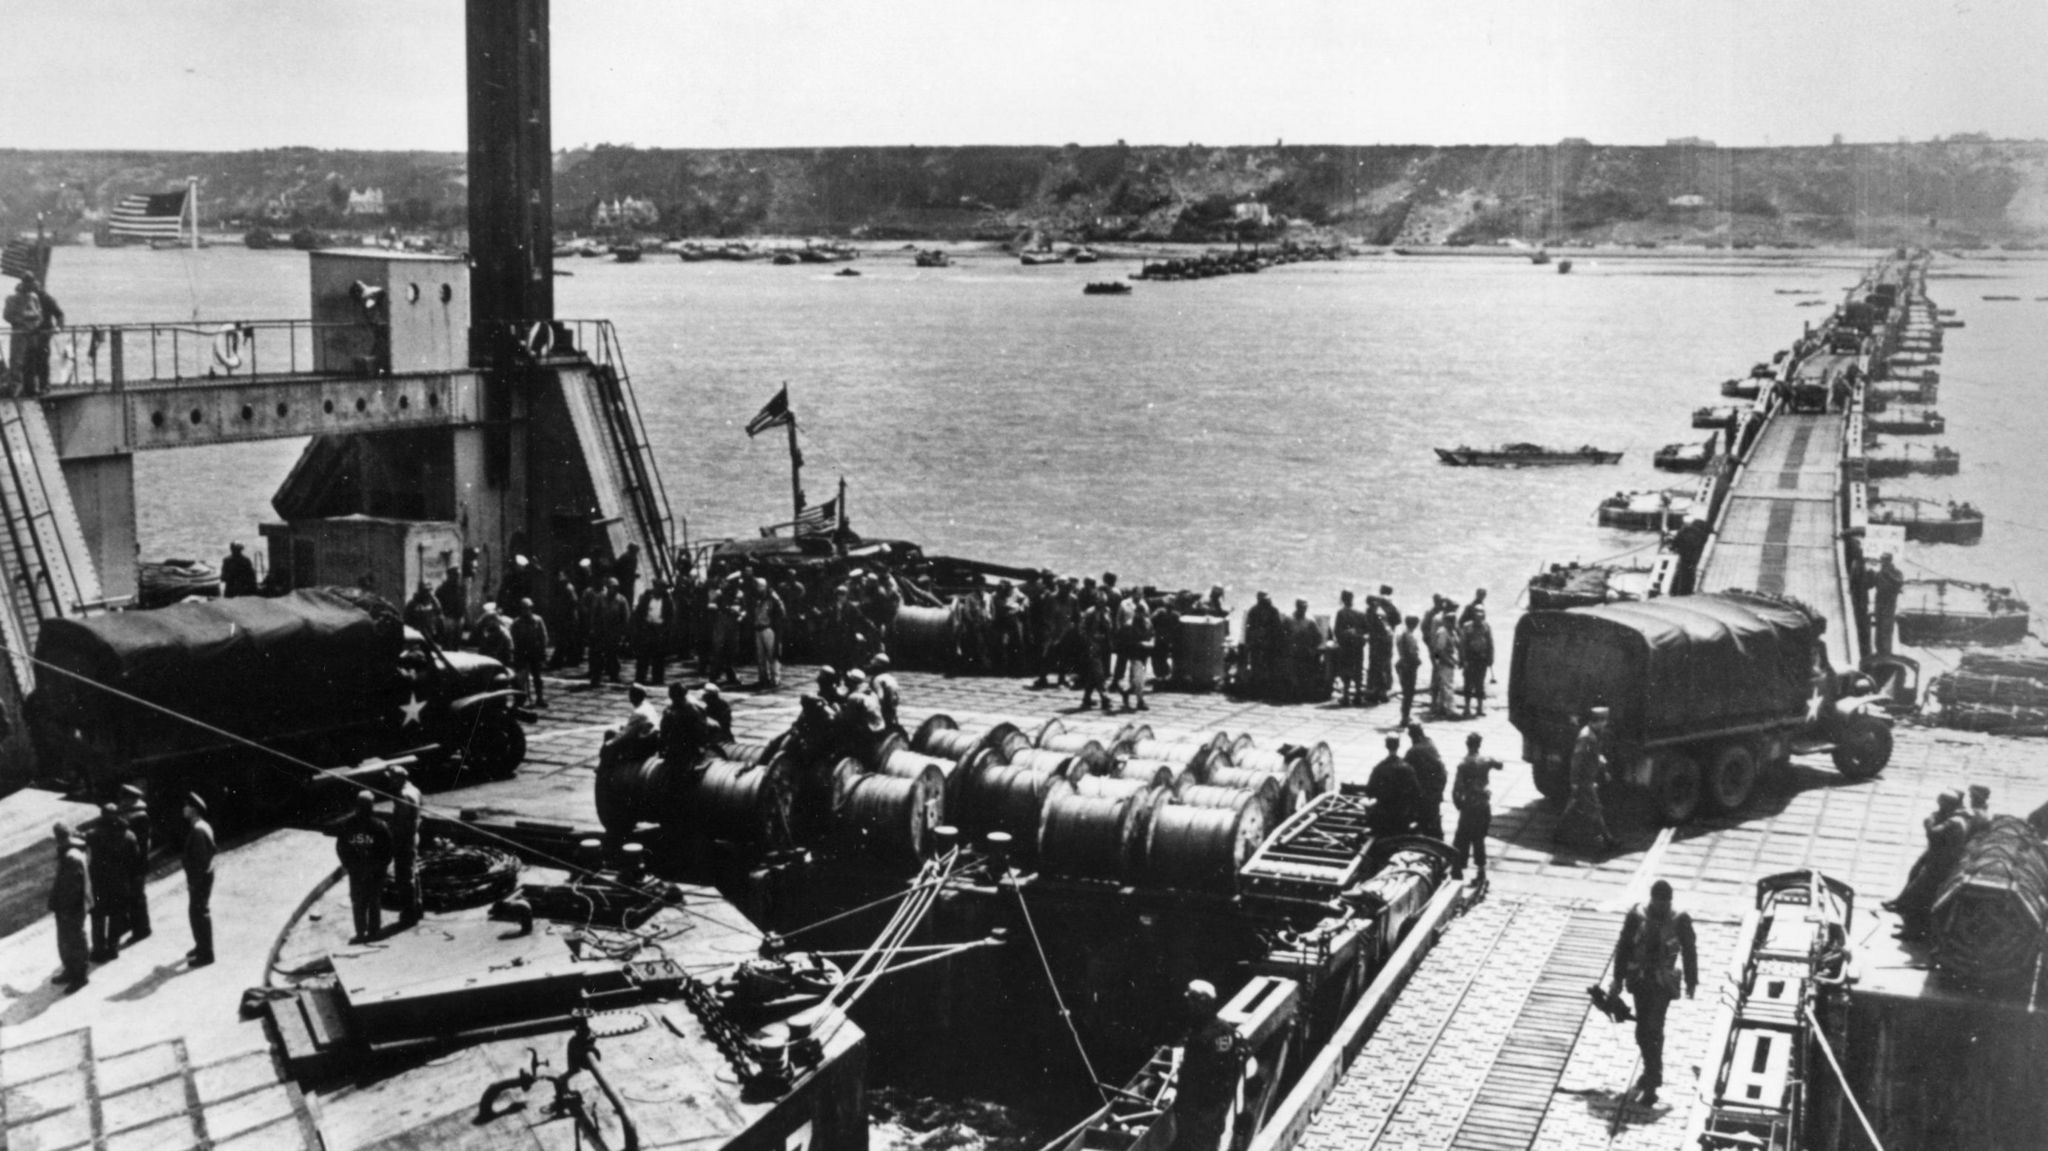 Construction of a Mulberry harbour, and the unloading of supplies for the Allies at Colleville, France